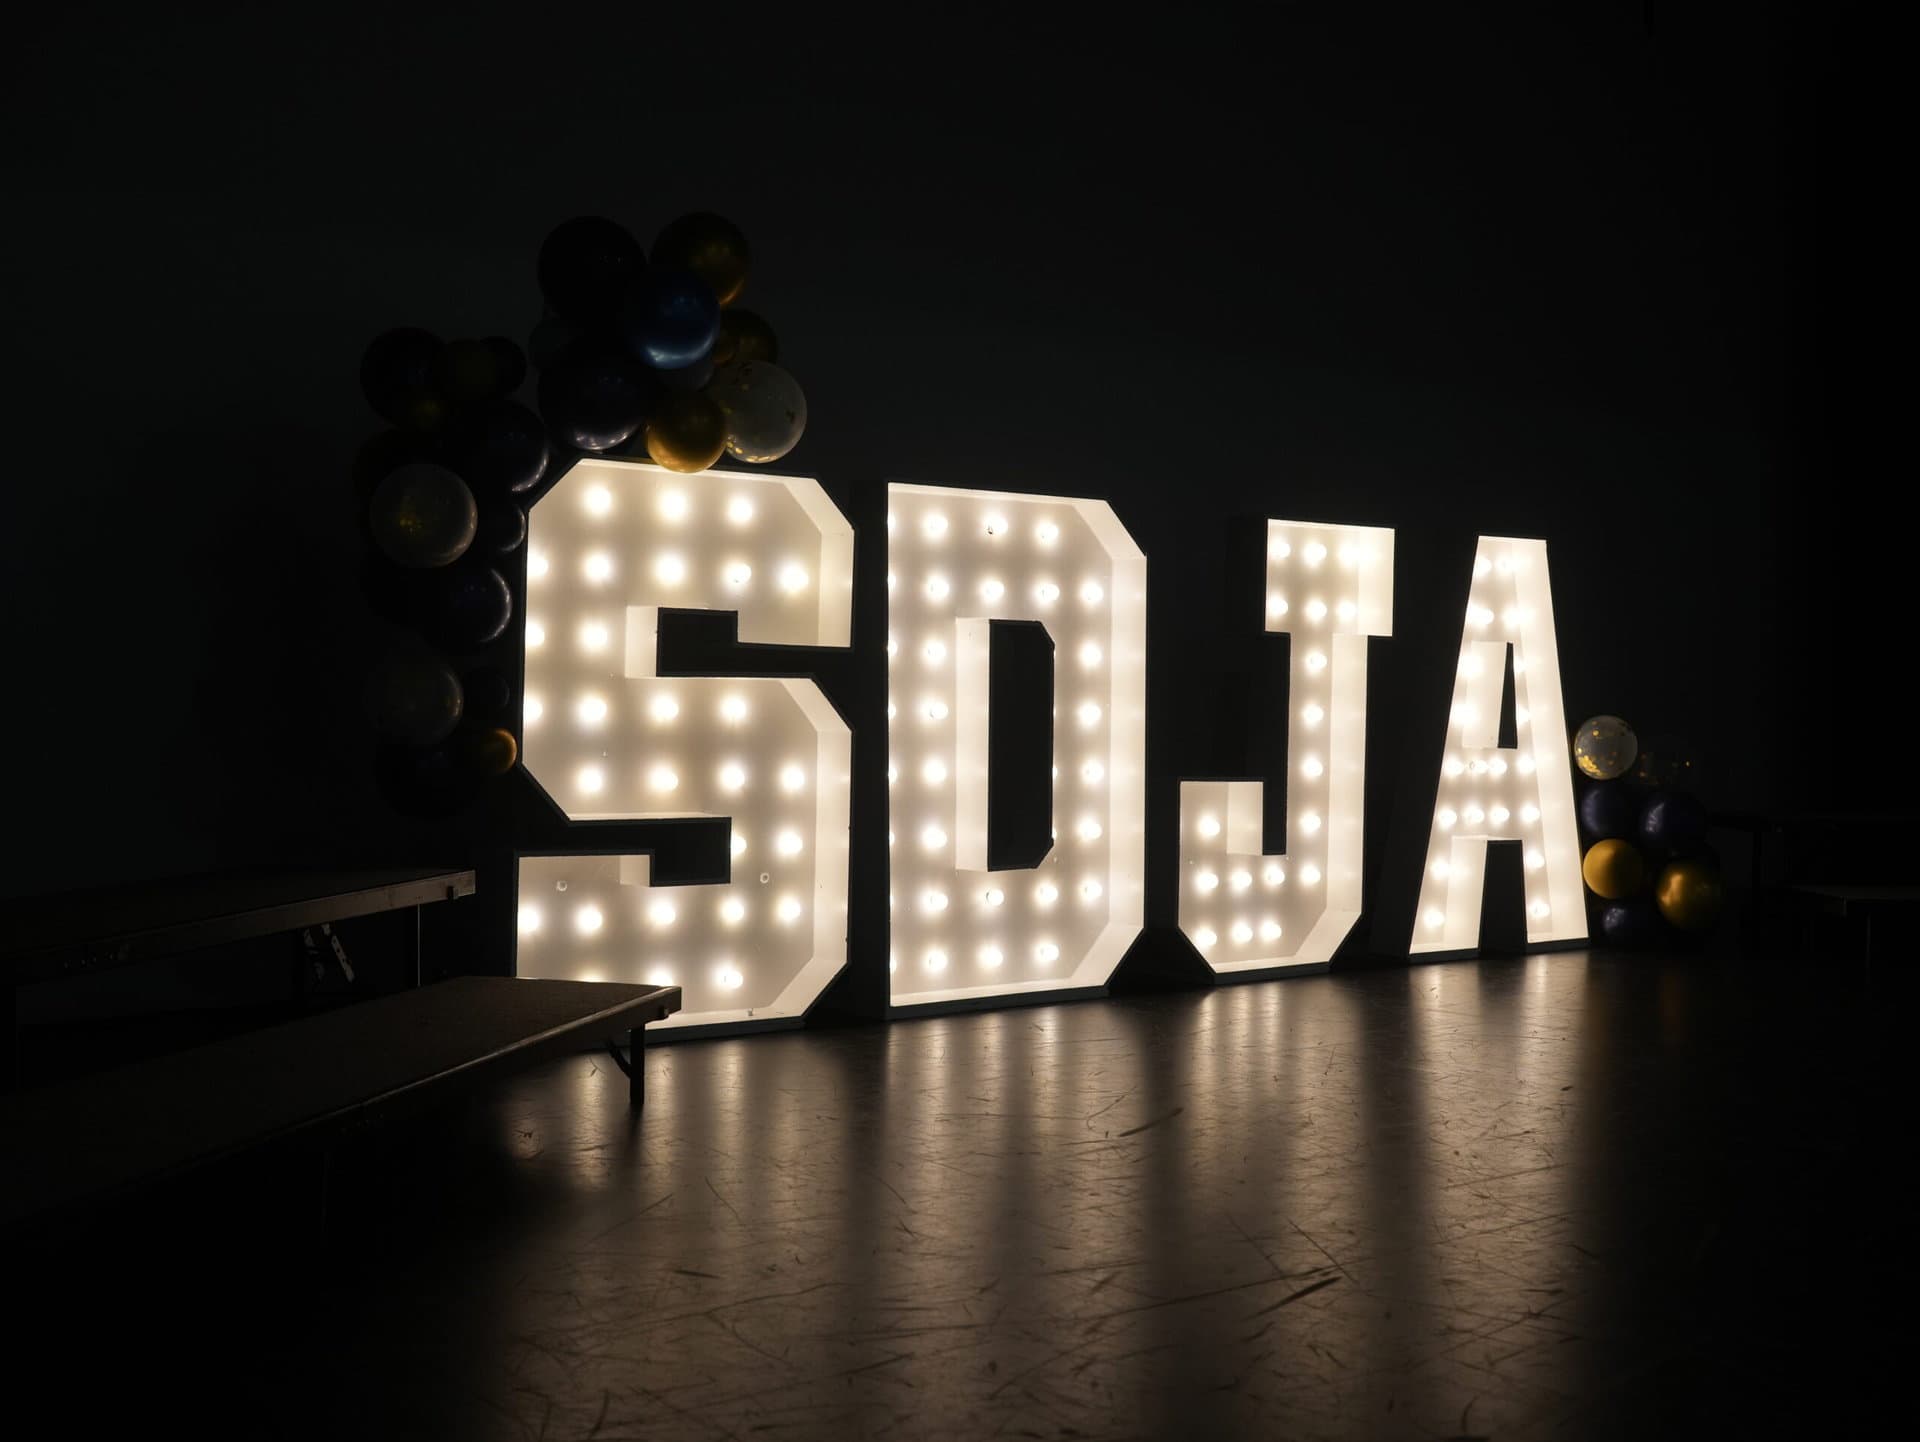 SDJA letters lit up with lights